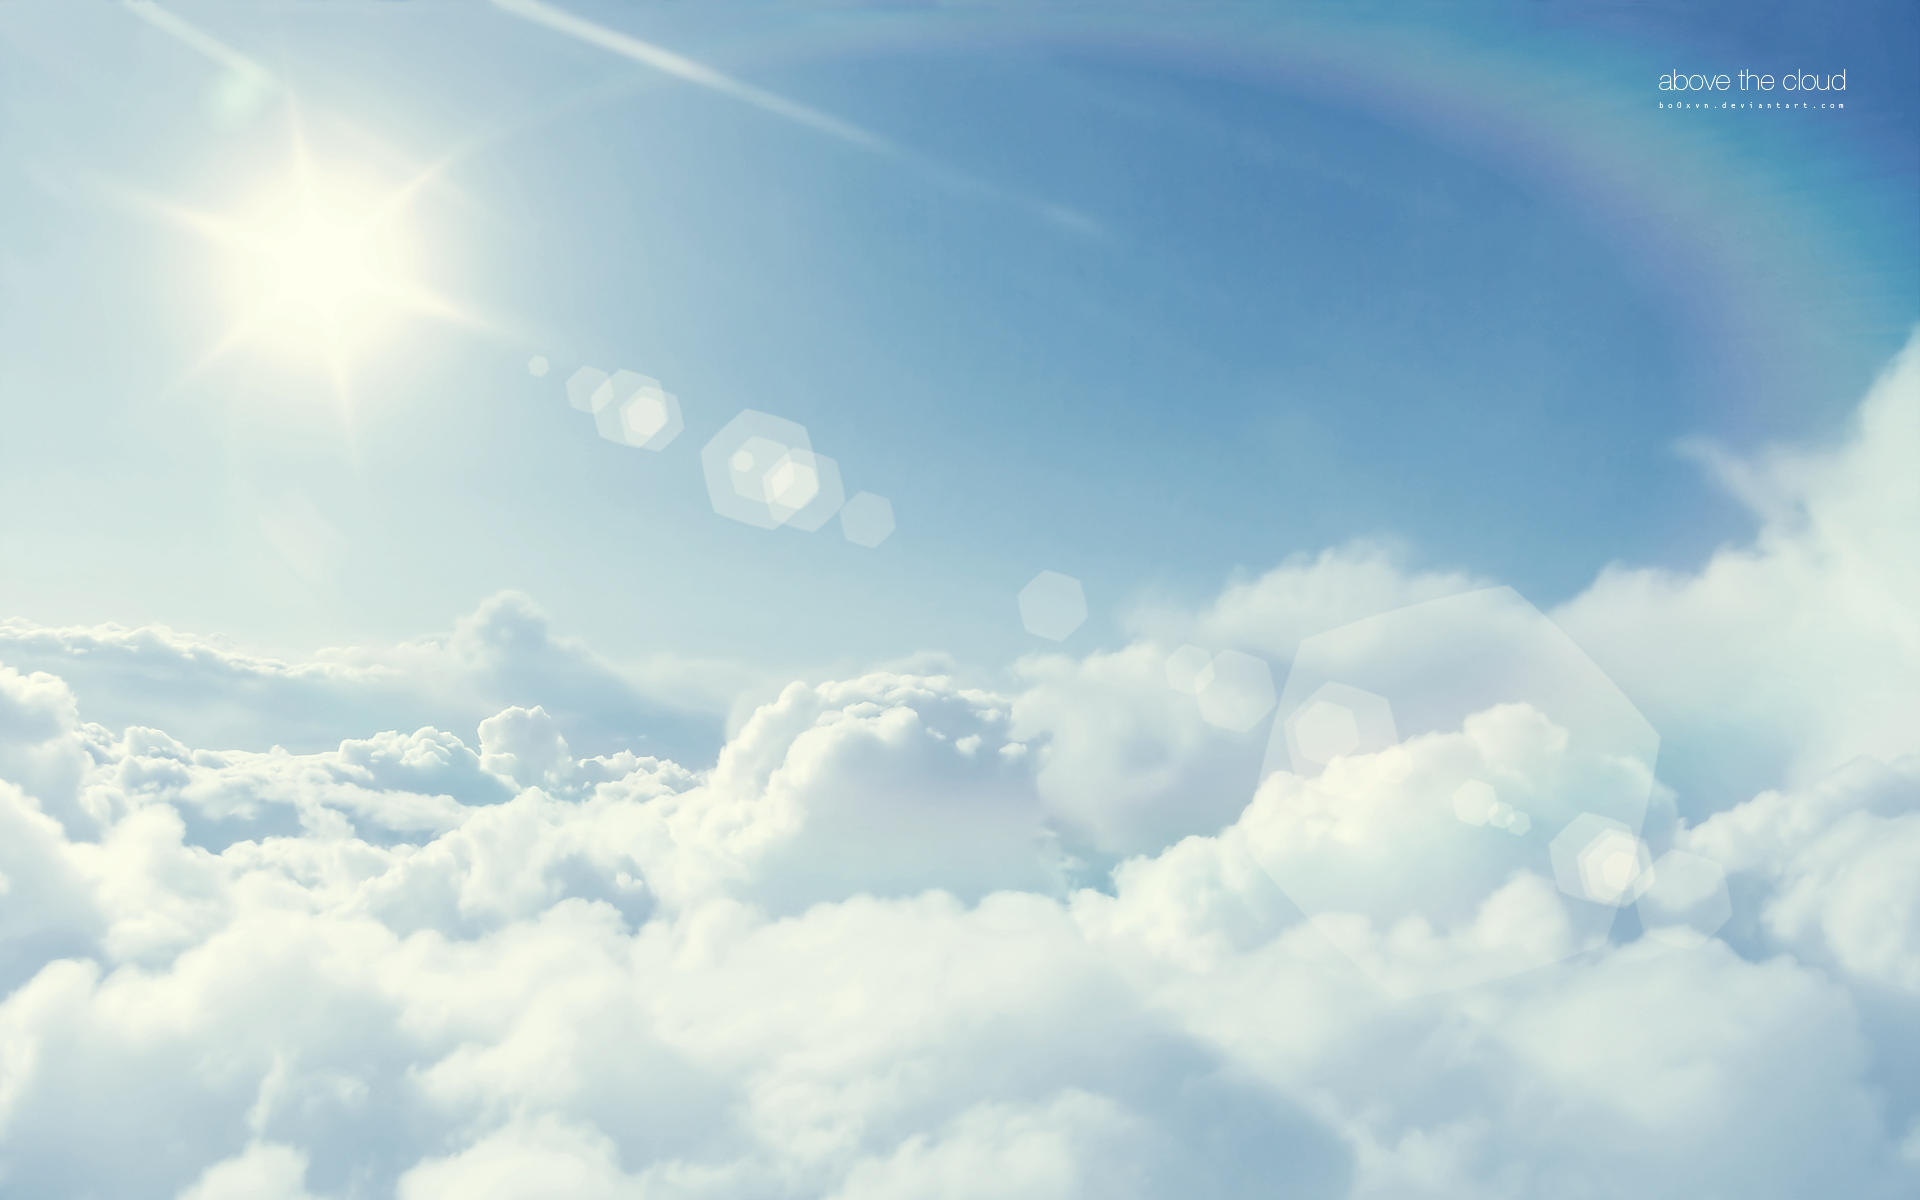 Above_the_clouds_by_bo0xVn.jpg